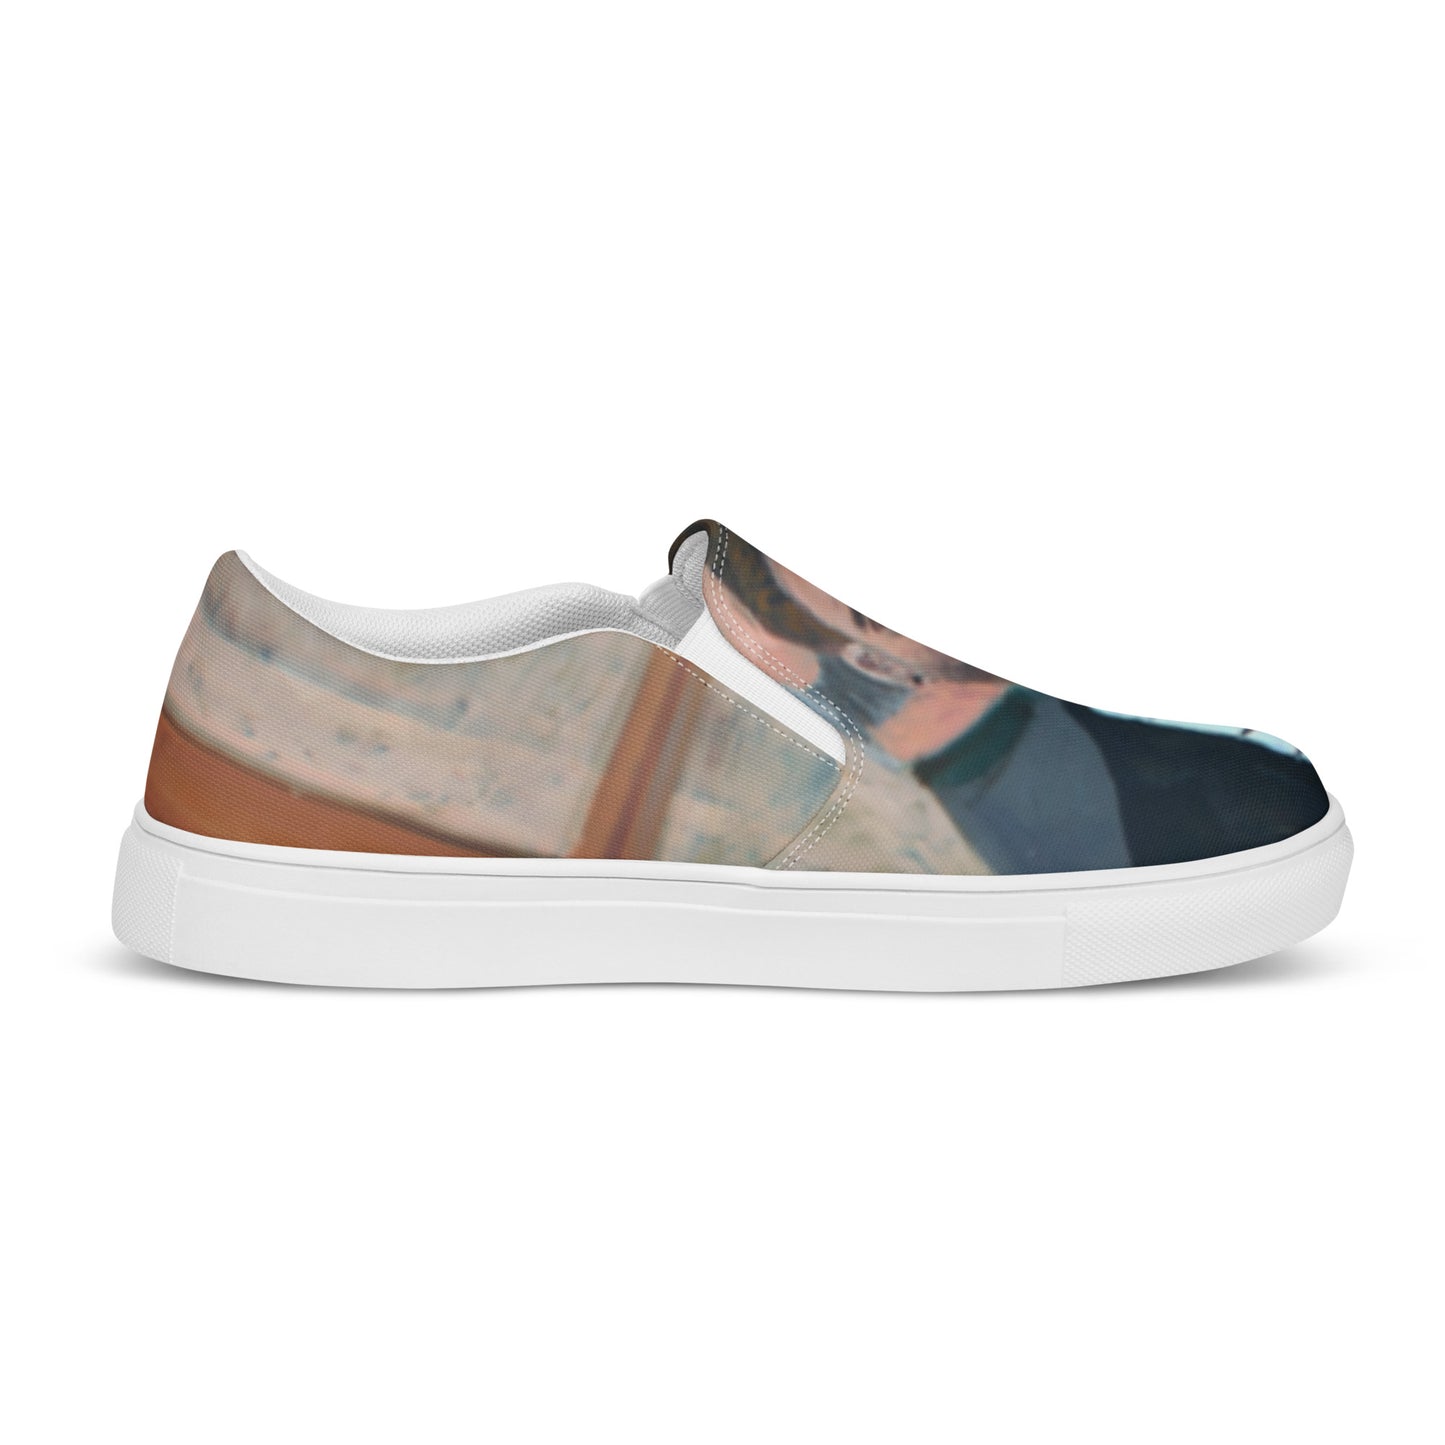 Man up - Women’s slip-on canvas shoes